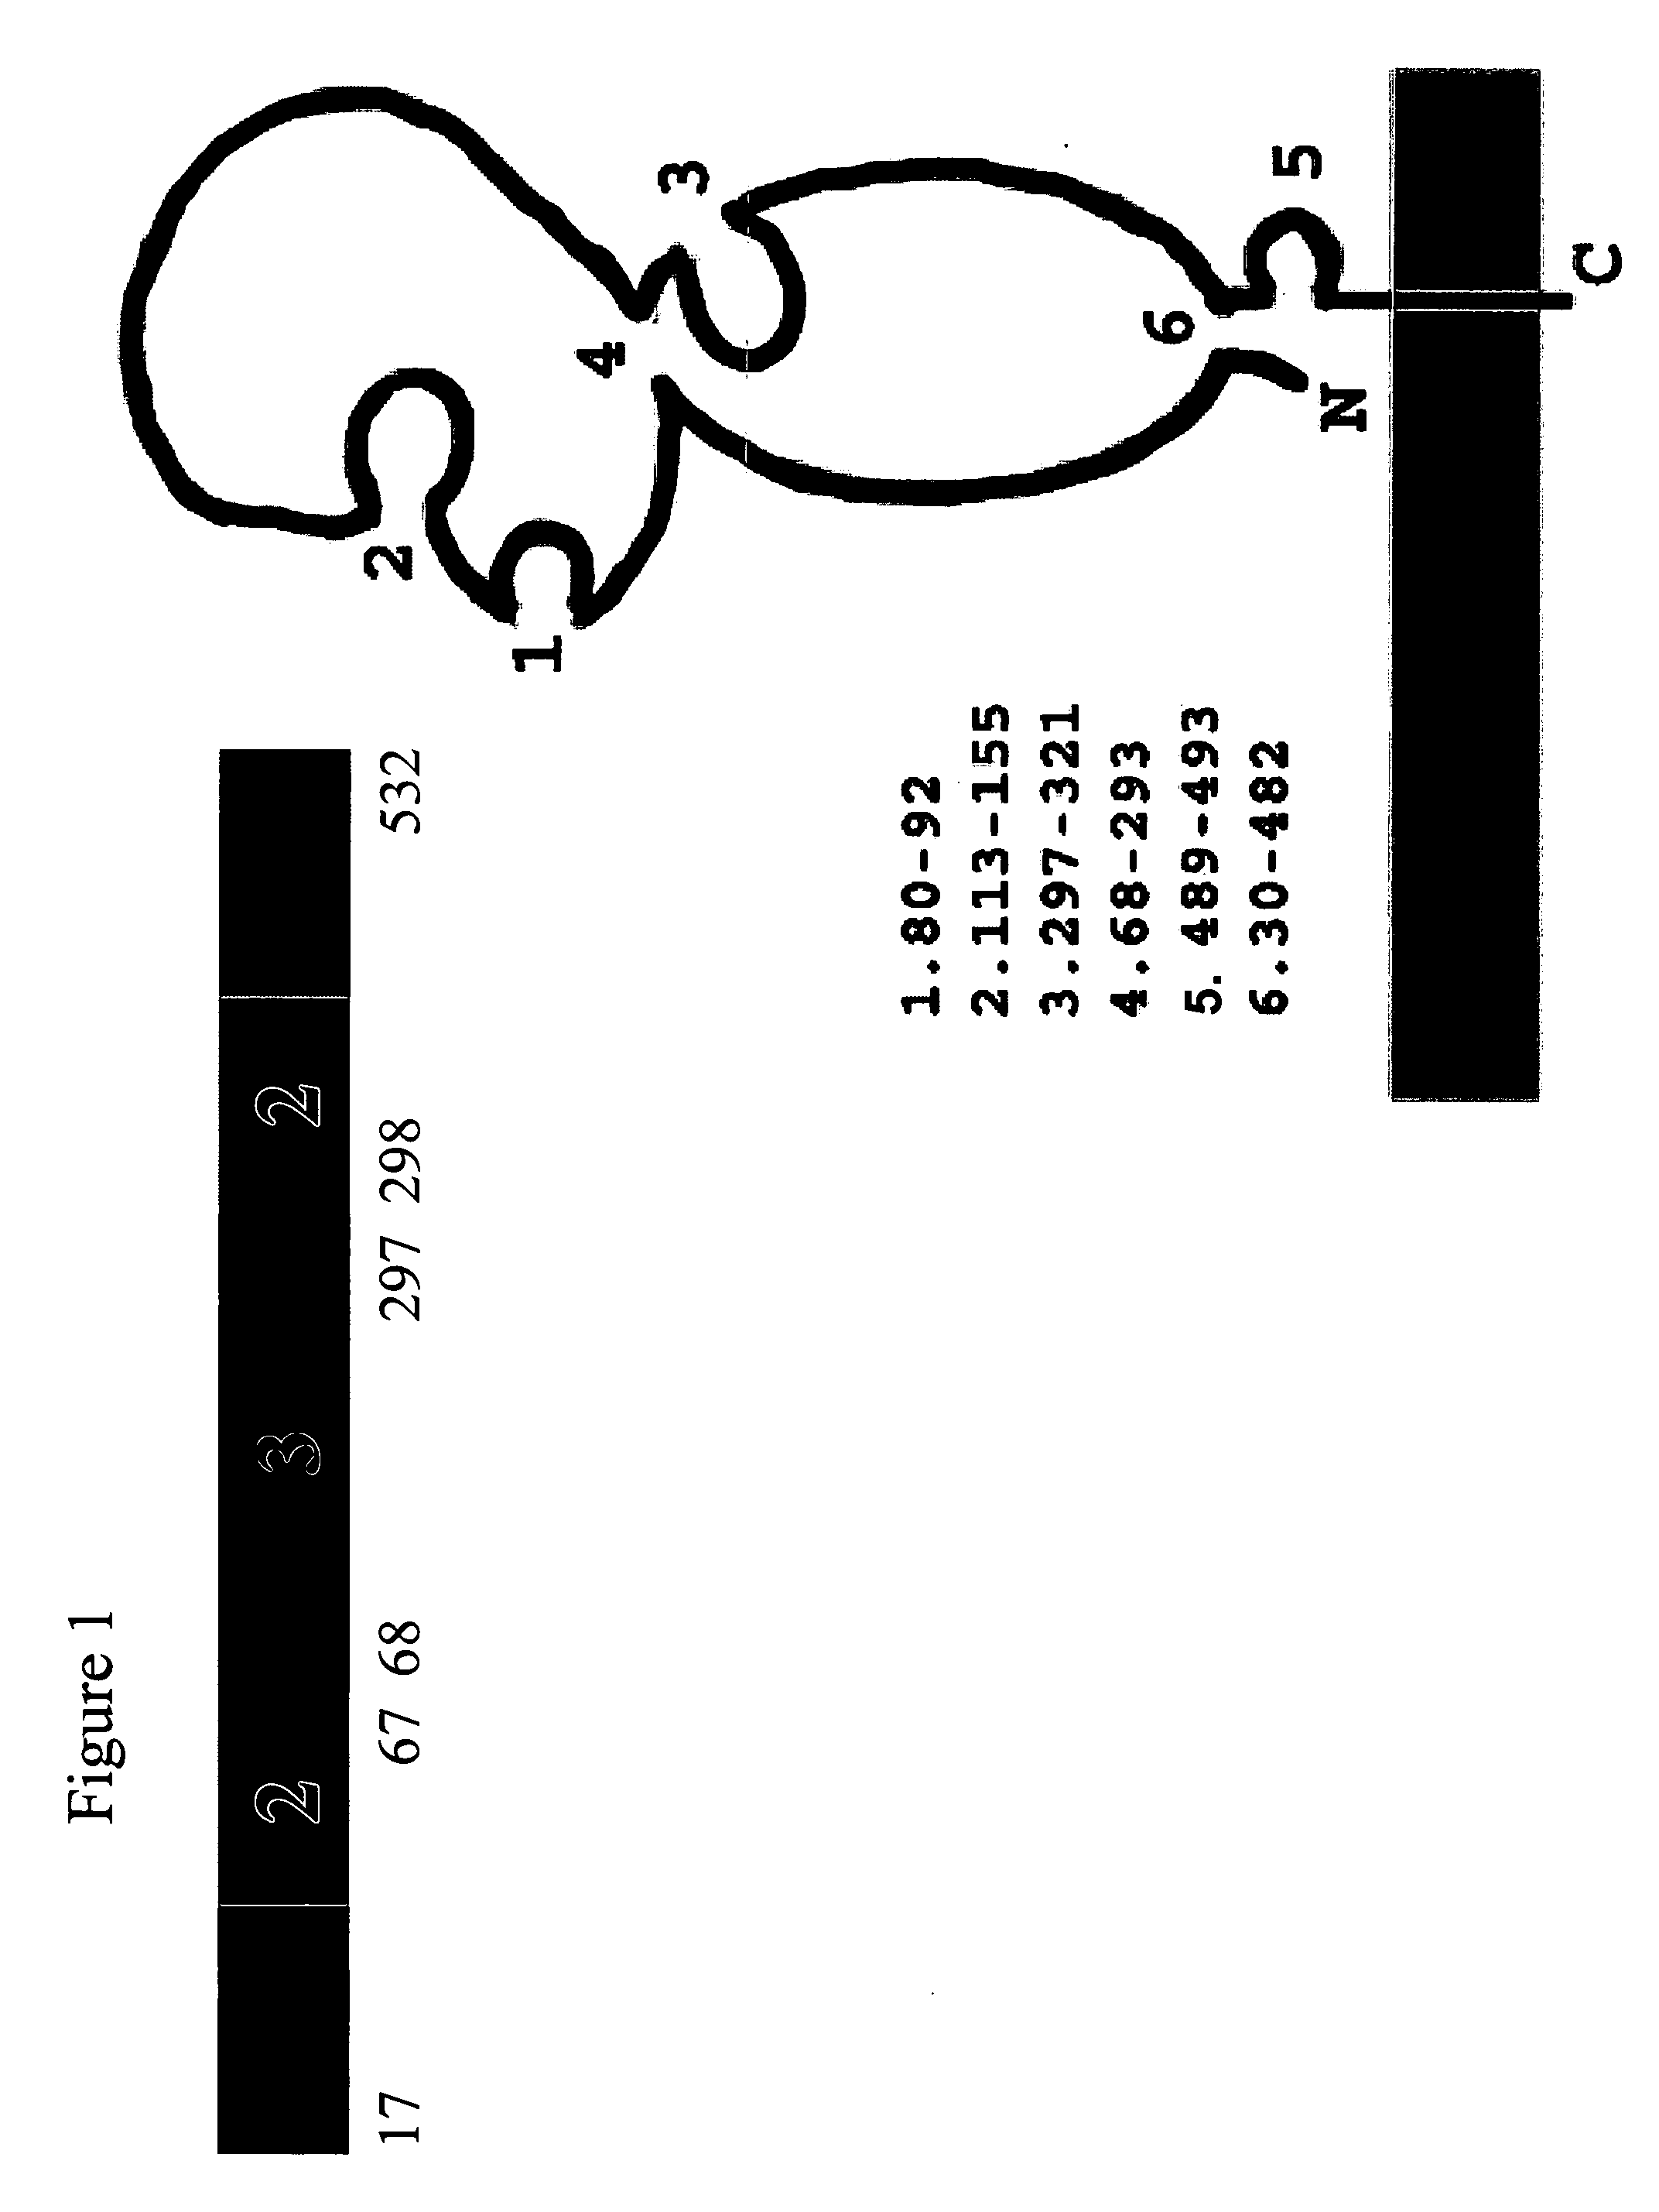 Influenza antigens, vaccine compositions, and related methods